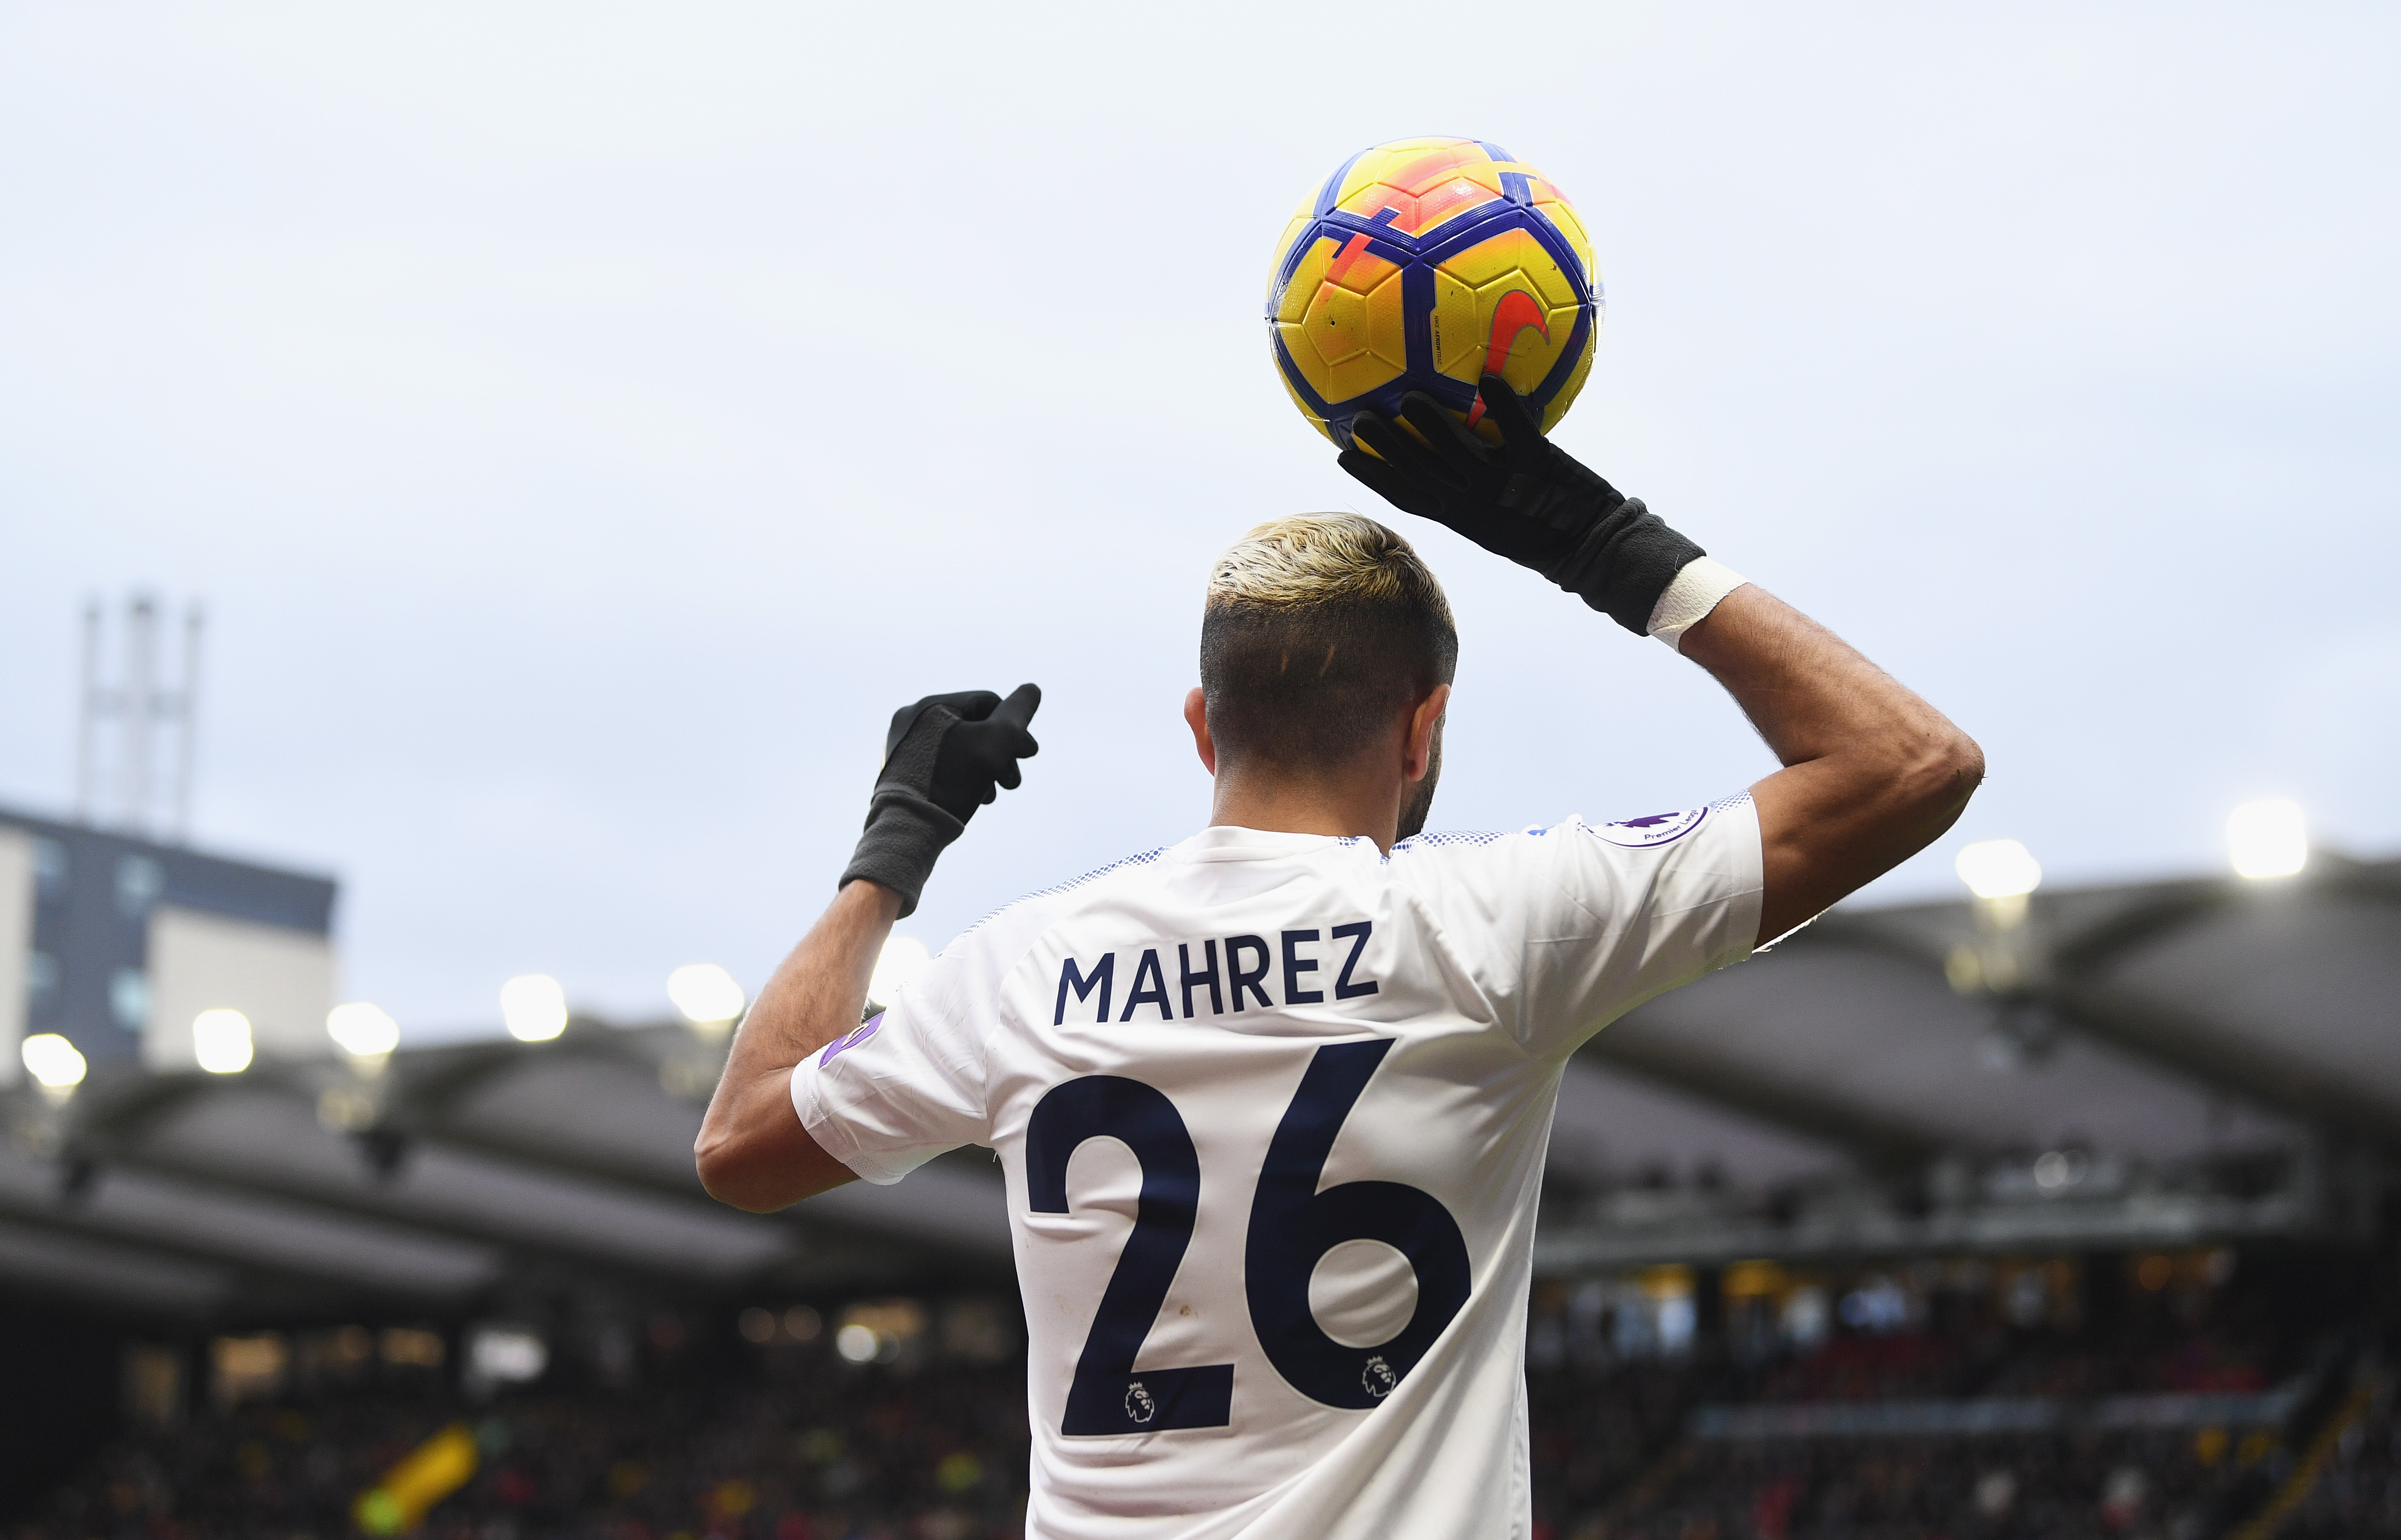 WATFORD, ENGLAND - DECEMBER 26:  Riyad Mahrez of Leicester City prepares to take a throw in during the Premier League match between Watford and Leicester City at Vicarage Road on December 26, 2017 in Watford, England.  (Photo by Michael Regan/Getty Images)